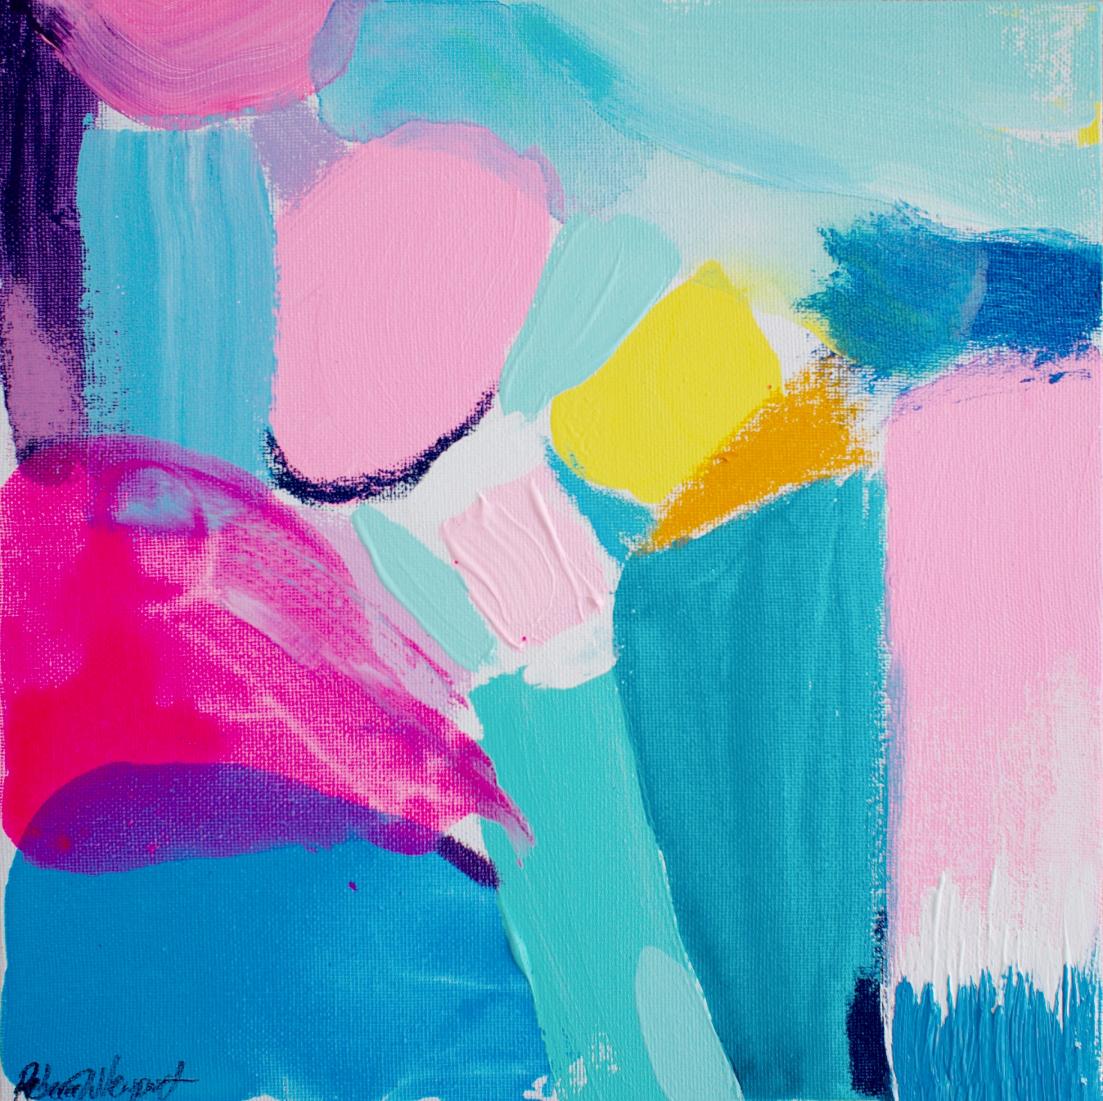 Rebecca Newport
Summer no. 2
Contemporary Abstract Painting
Acrylic and Oil Stick on canvas
Canvas Size H 30cm x W 30cm x D 1.3cm
Sold unframed.
Please note that insitu images are purely an indication of how a piece may look.

‘Summer no. 2’ is an